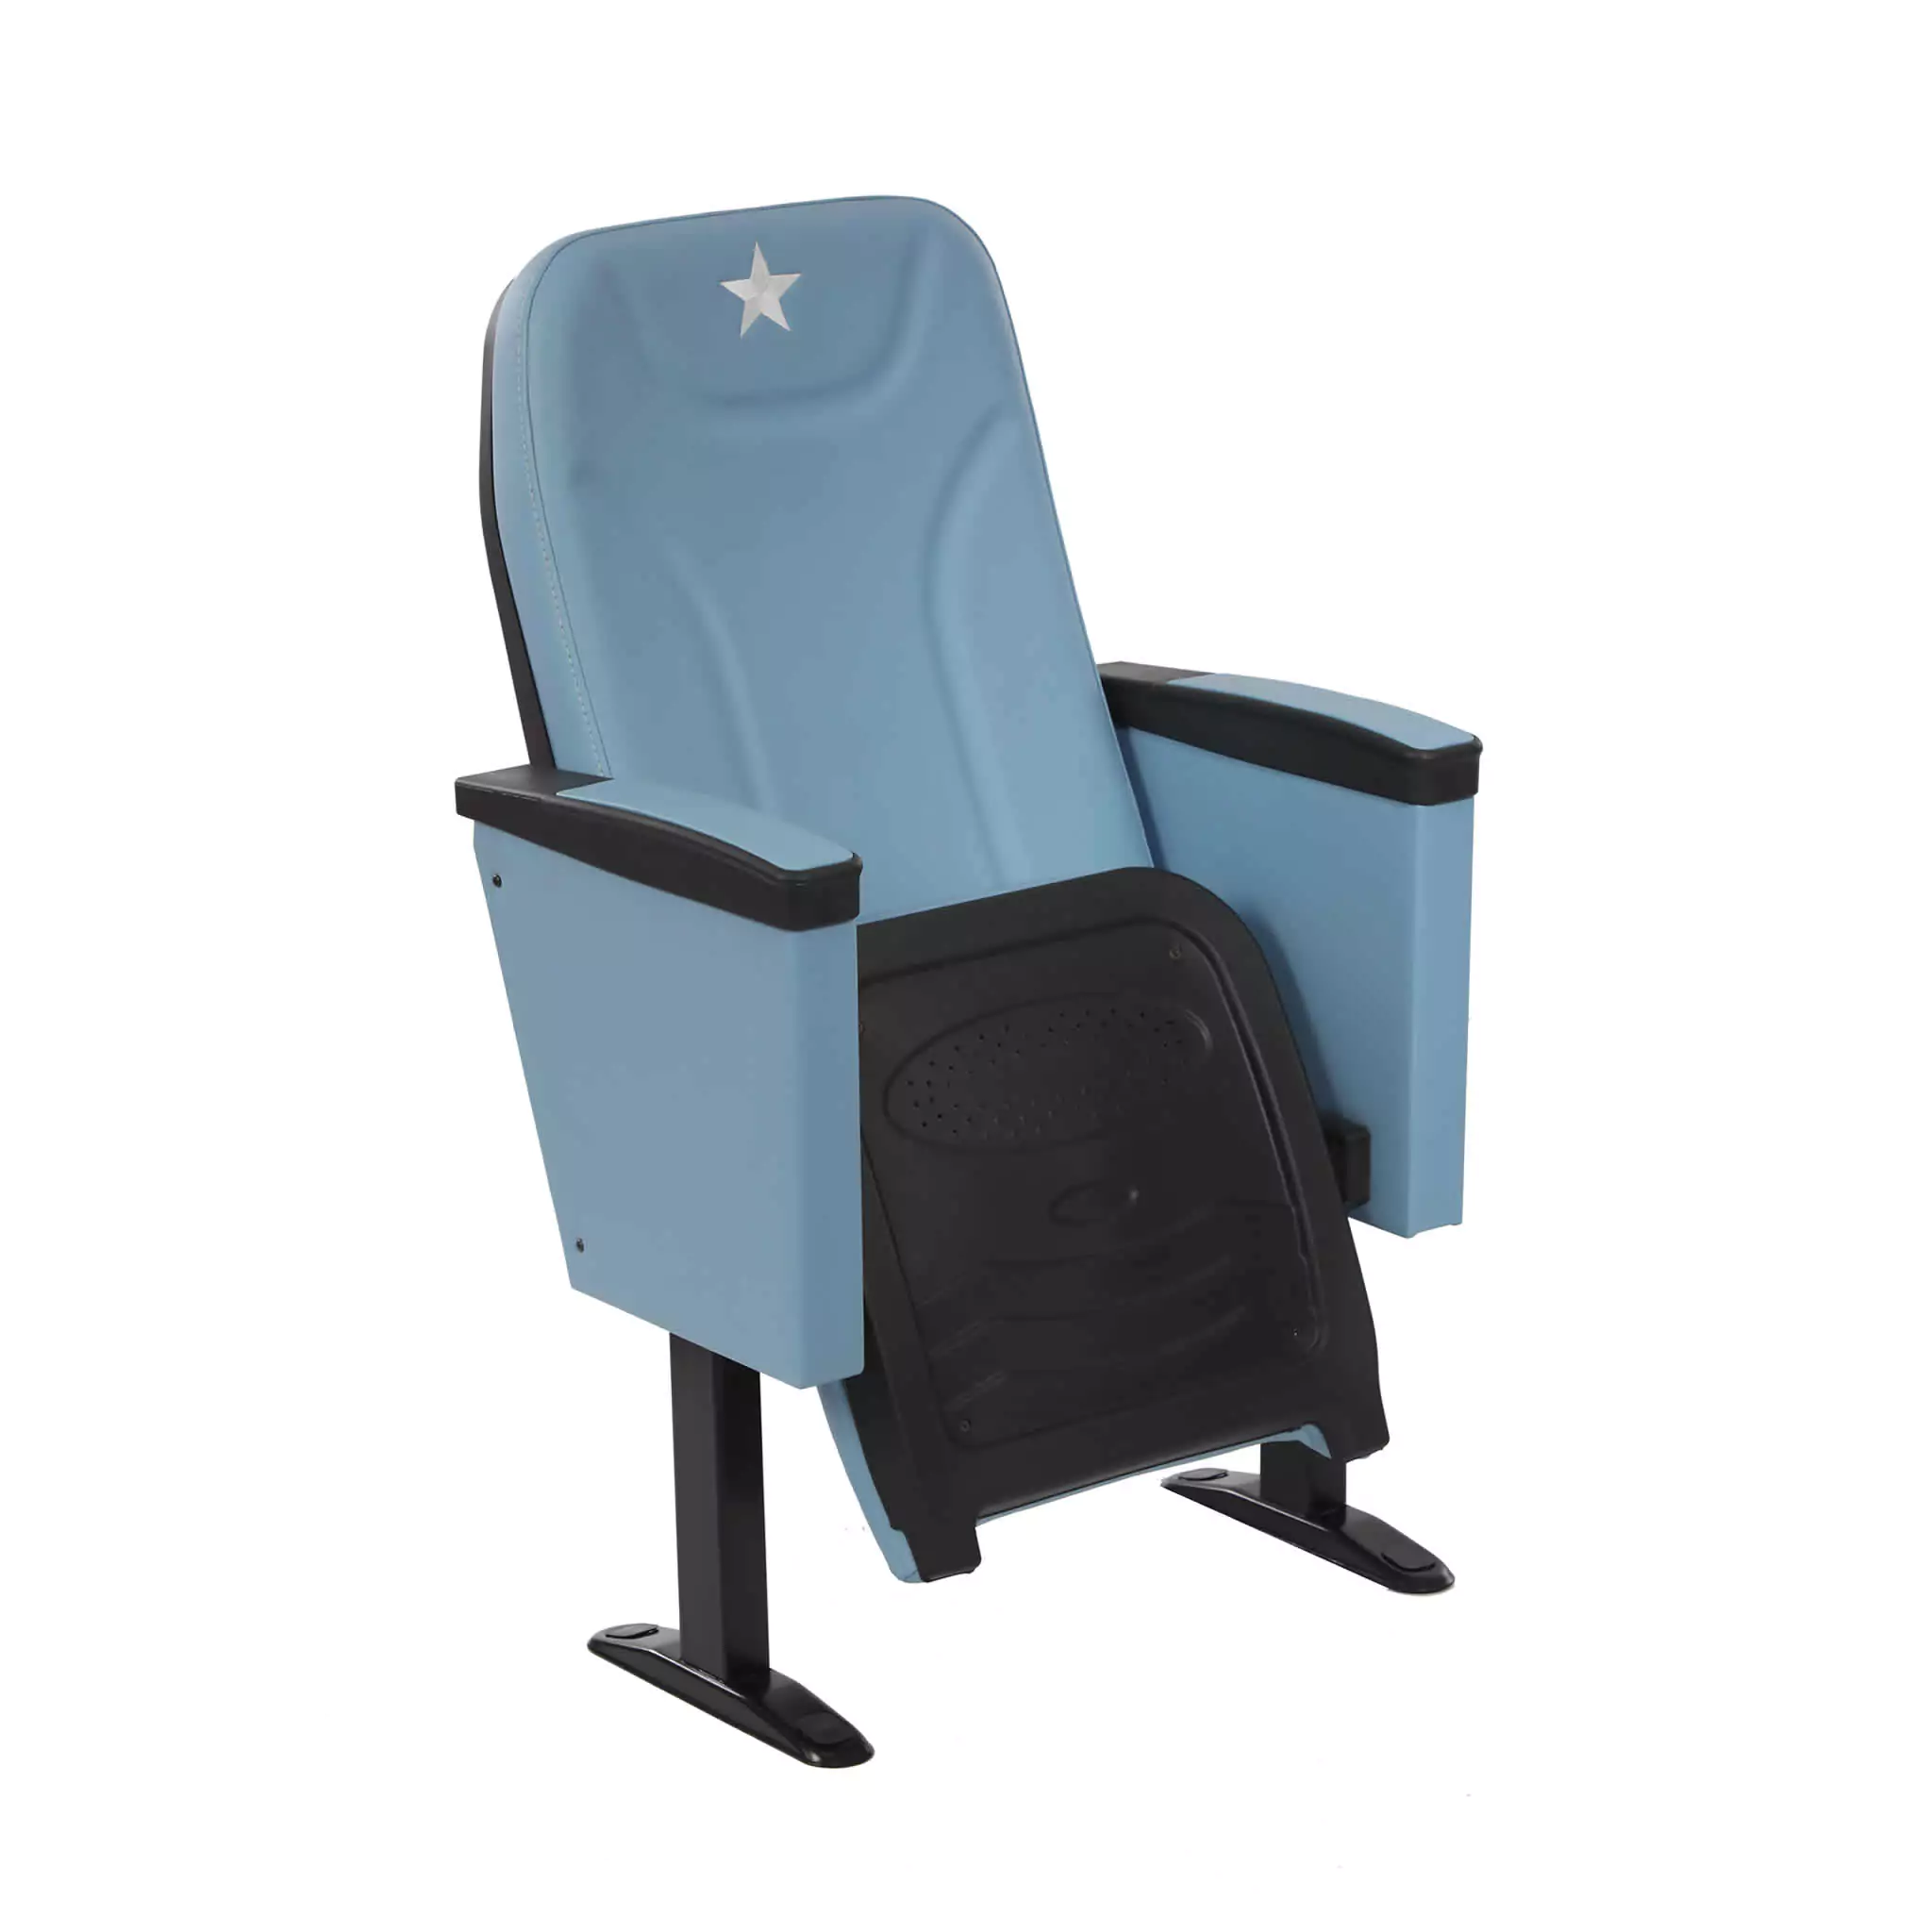 Simko Seating Product Conference Seat Zirkon 05